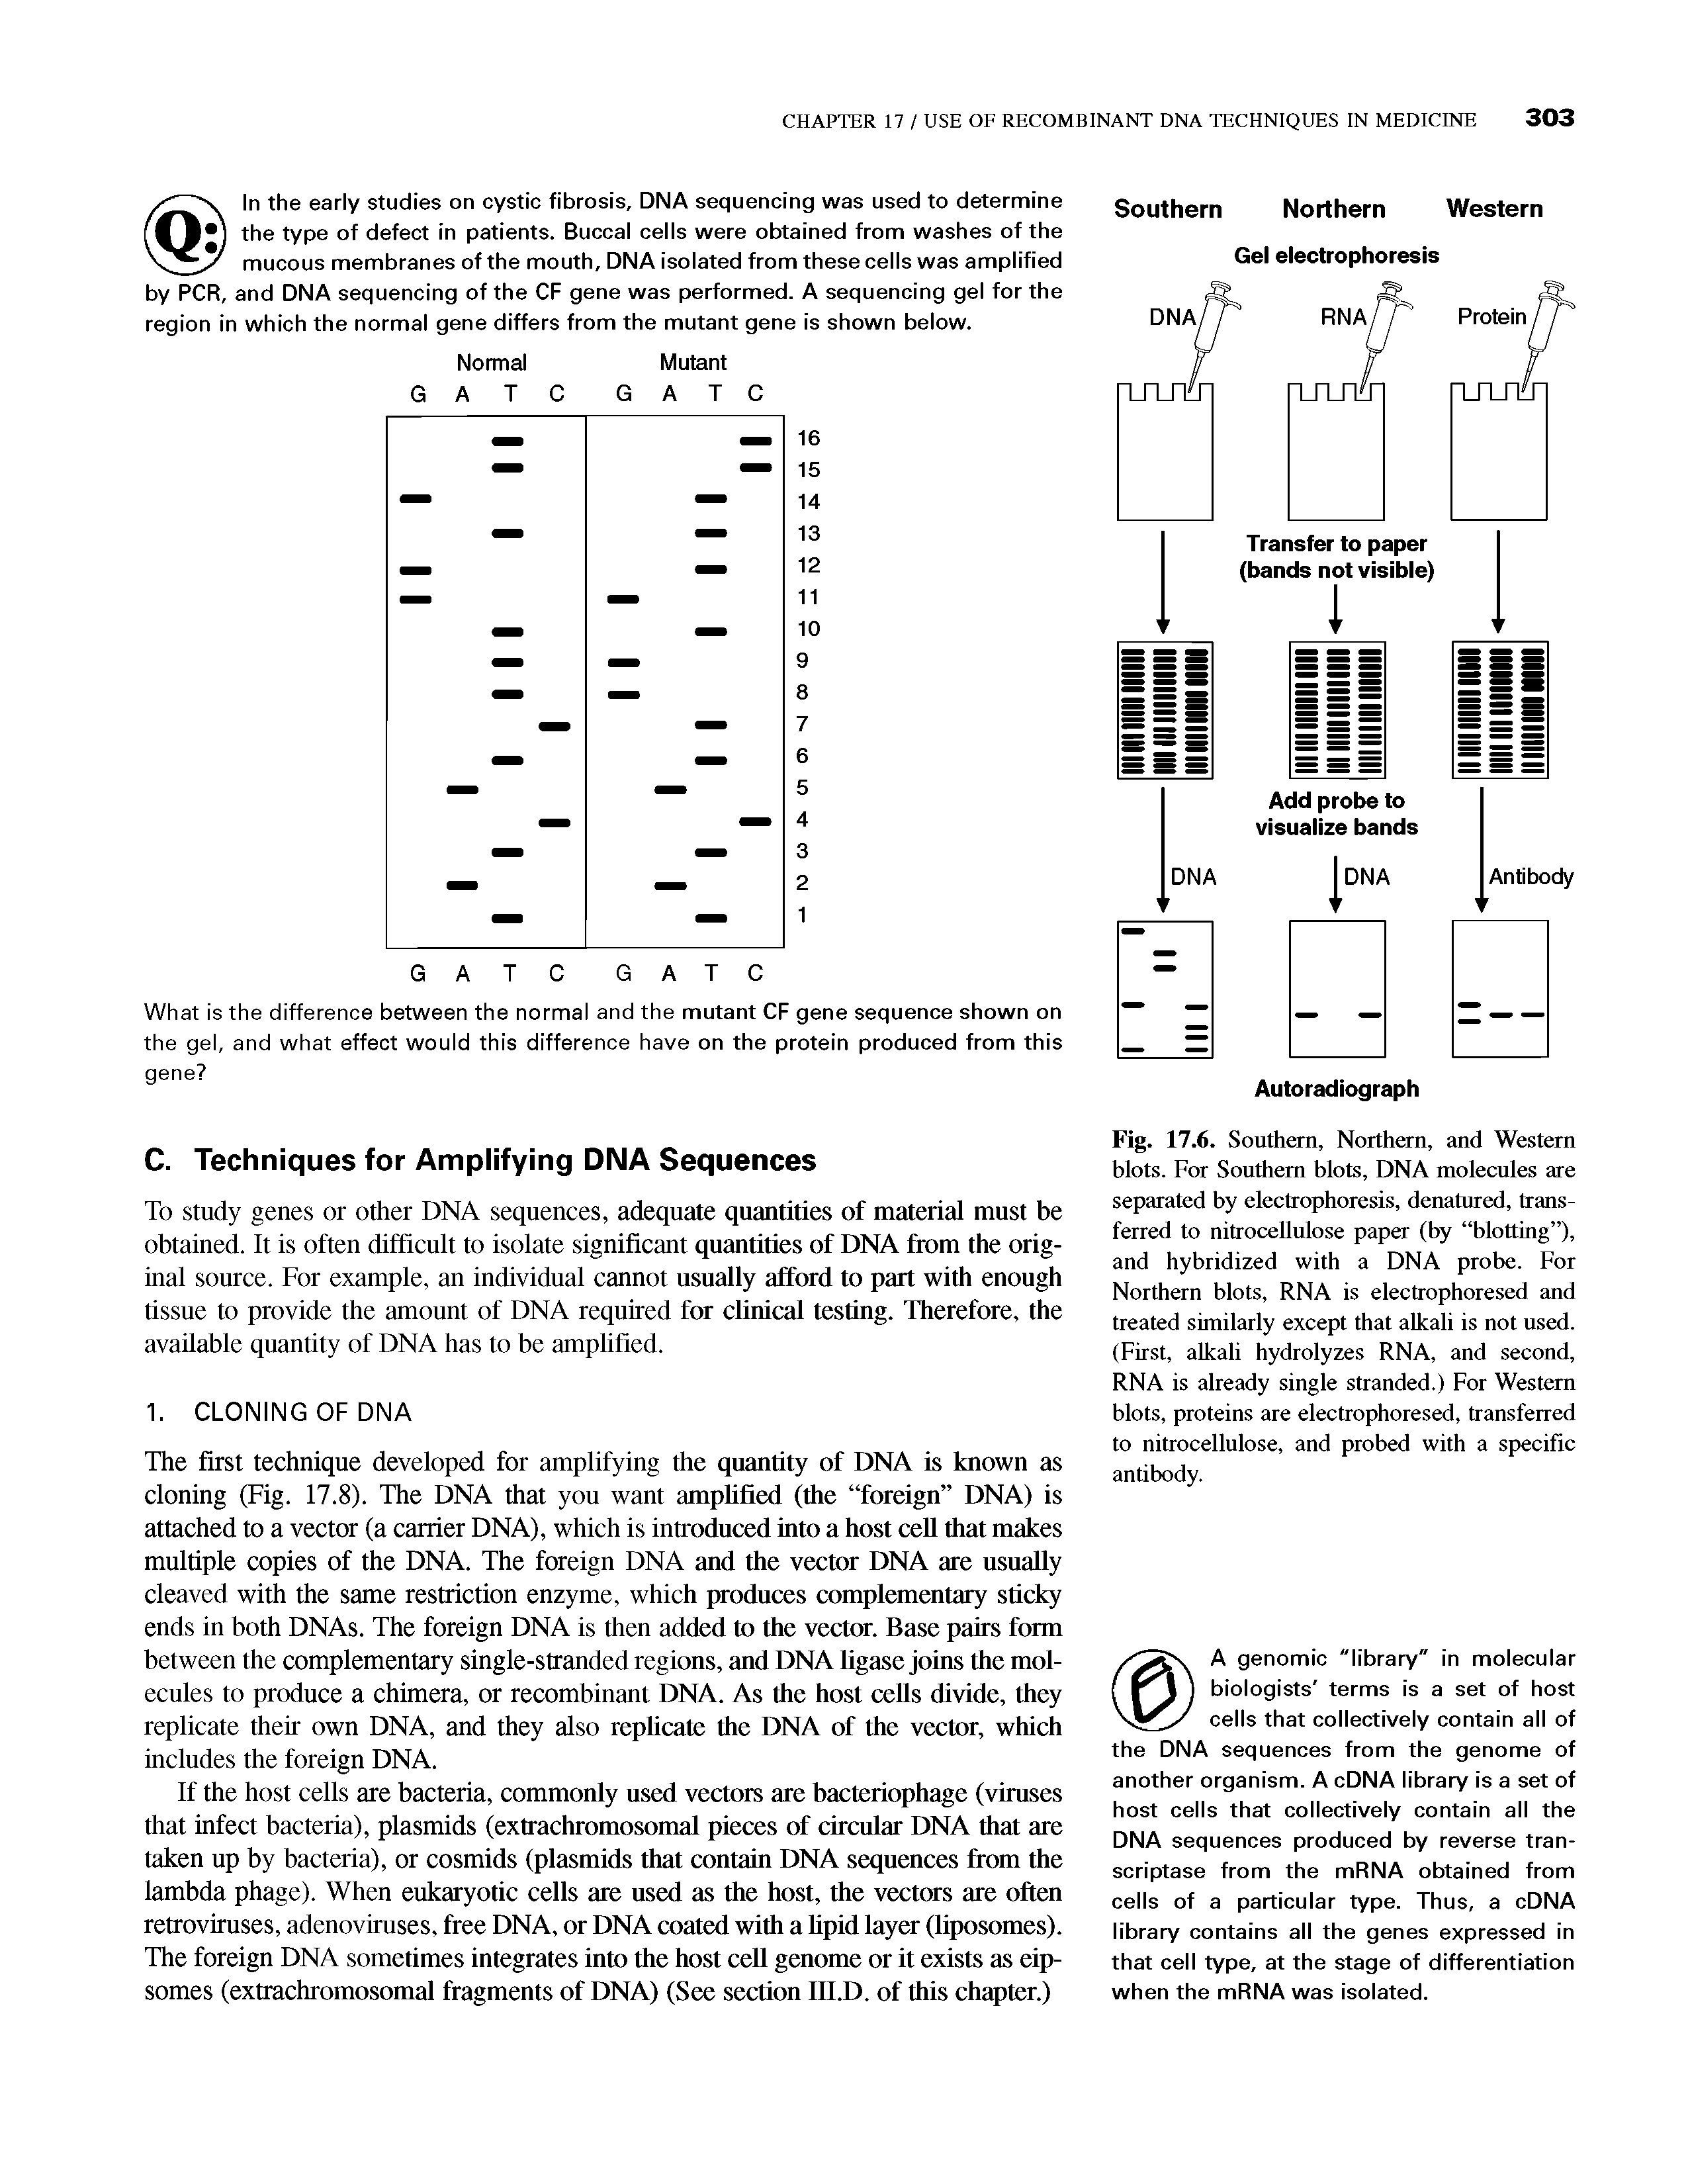 Fig. 17.6. Southern, Northern, and Western blots. For Southern blots, DNA molecules are separated by electrophoresis, denatured, transferred to nitrocellulose paper (by blotting ), and hybridized with a DNA probe. For Northern blots, RNA is electrophoresed and treated similarly except that alkali is not used. (First, alkali hydrolyzes RNA, and second, RNA is already single stranded.) For Western blots, proteins are electrophoresed, transferred to nitrocellulose, and probed with a specific antibody.